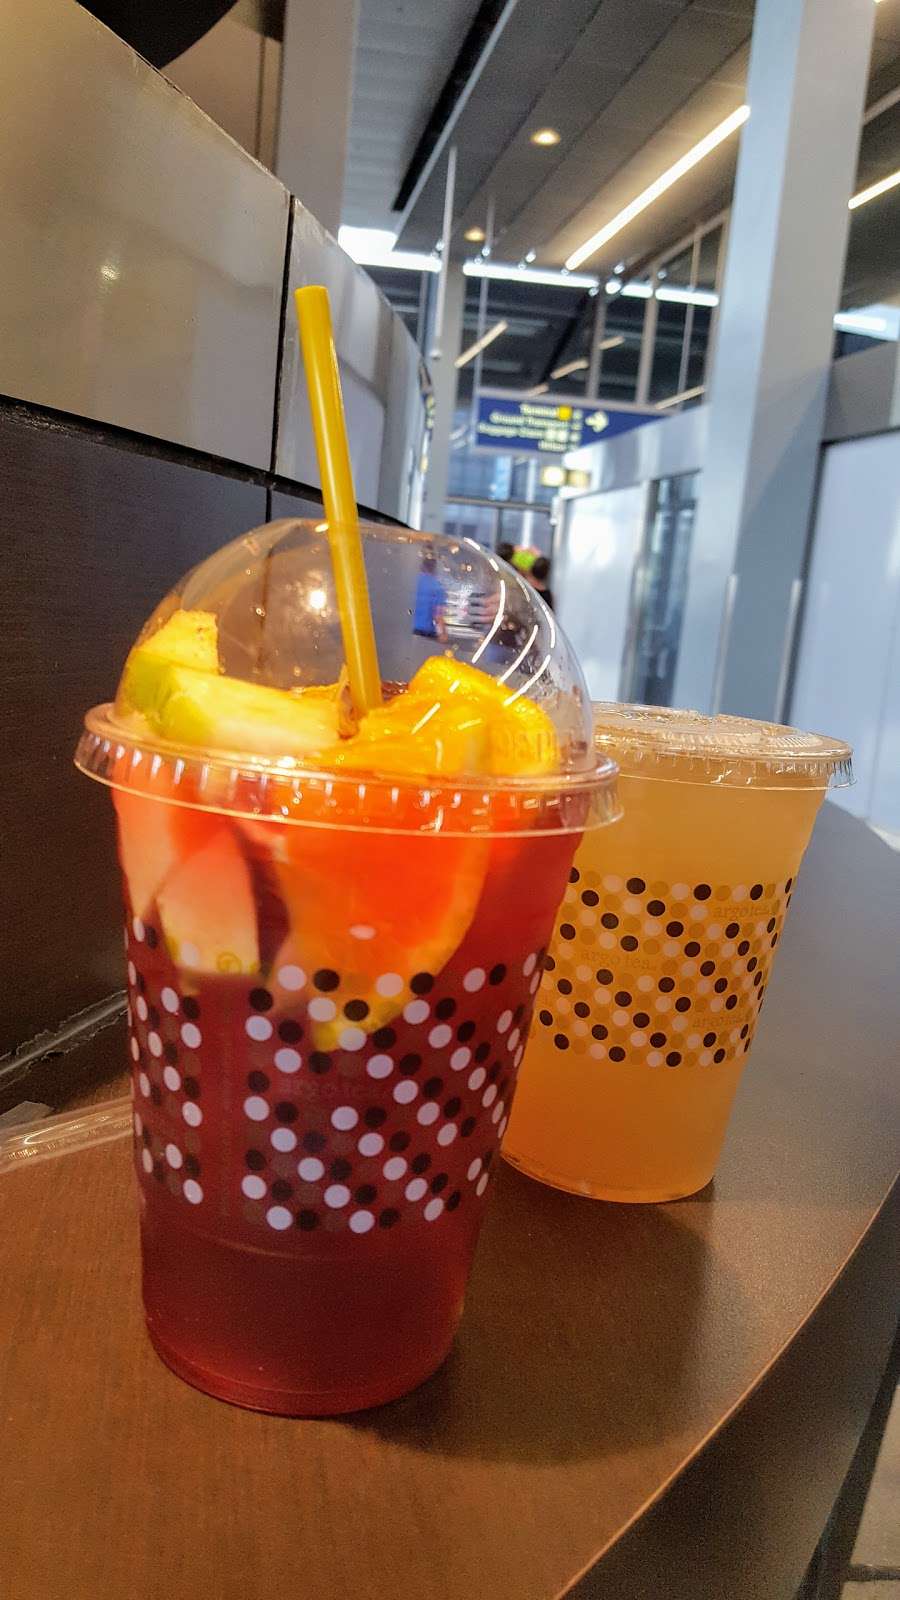 Argo Tea | OHare International Airport (ORD, Between Gates H and G, Terminal 3, Chicago, IL 60666, USA | Phone: (773) 663-4175